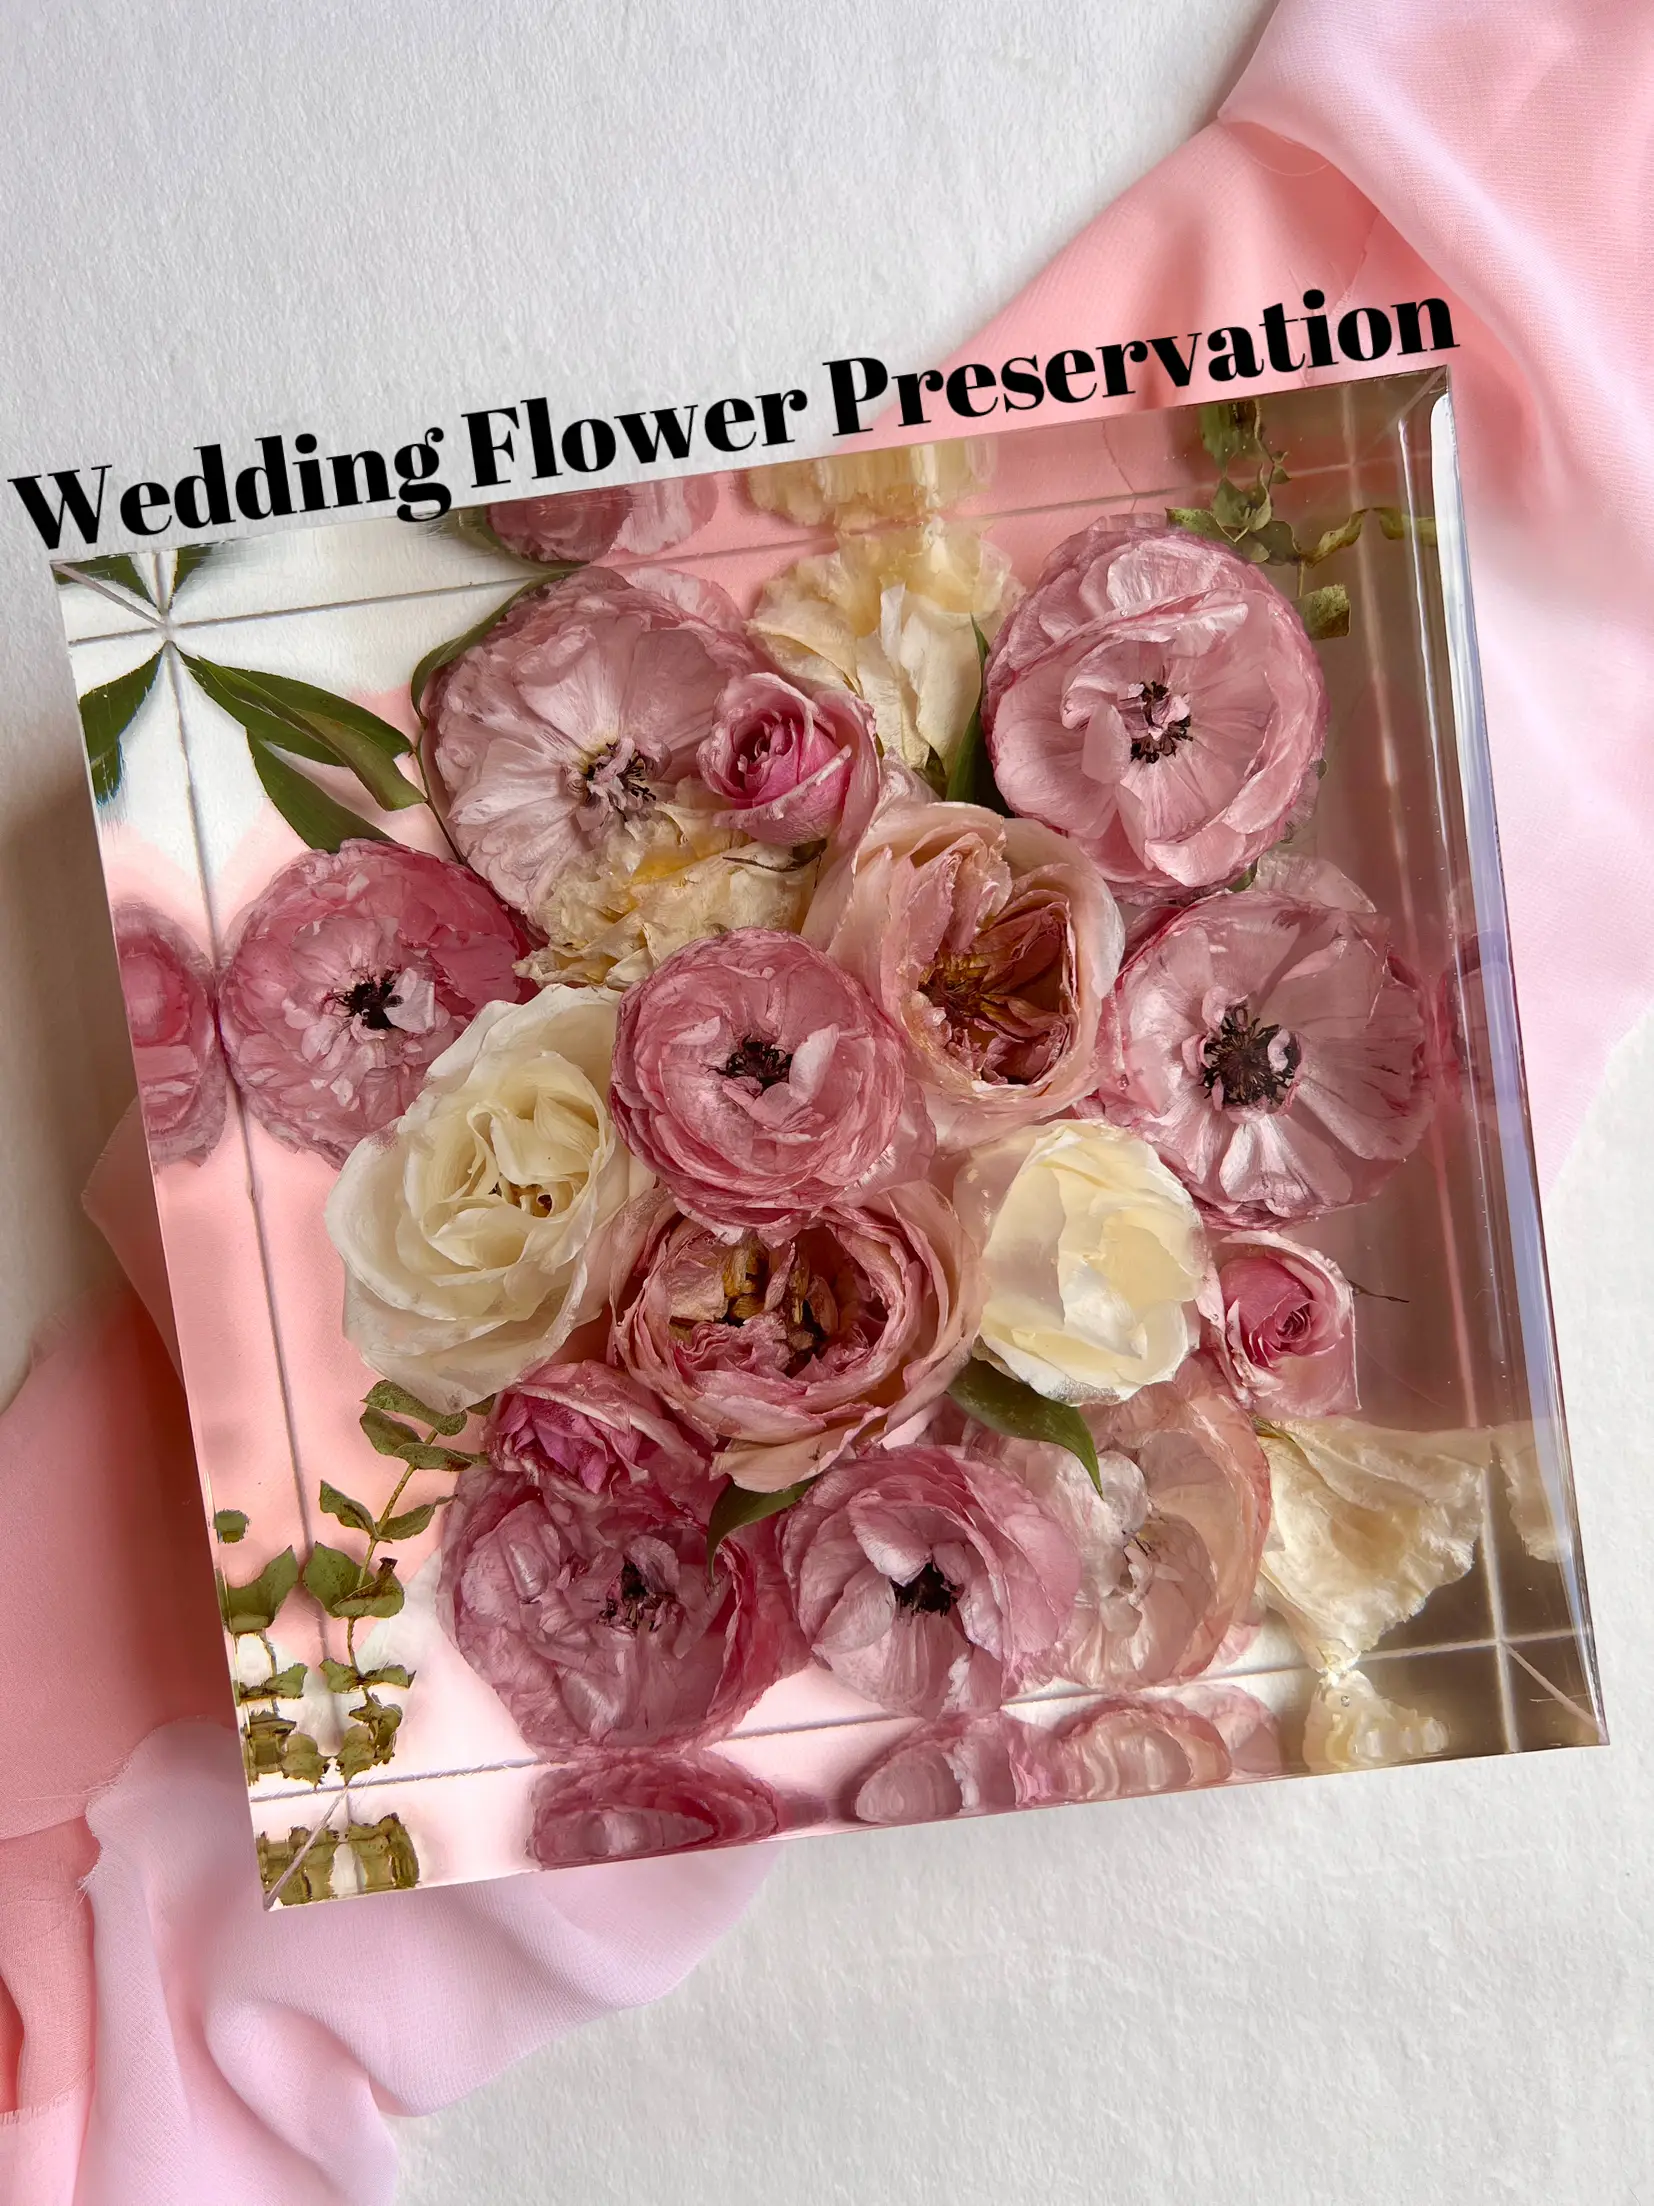 Wedding Flower Preservation, Gallery posted by Mariah